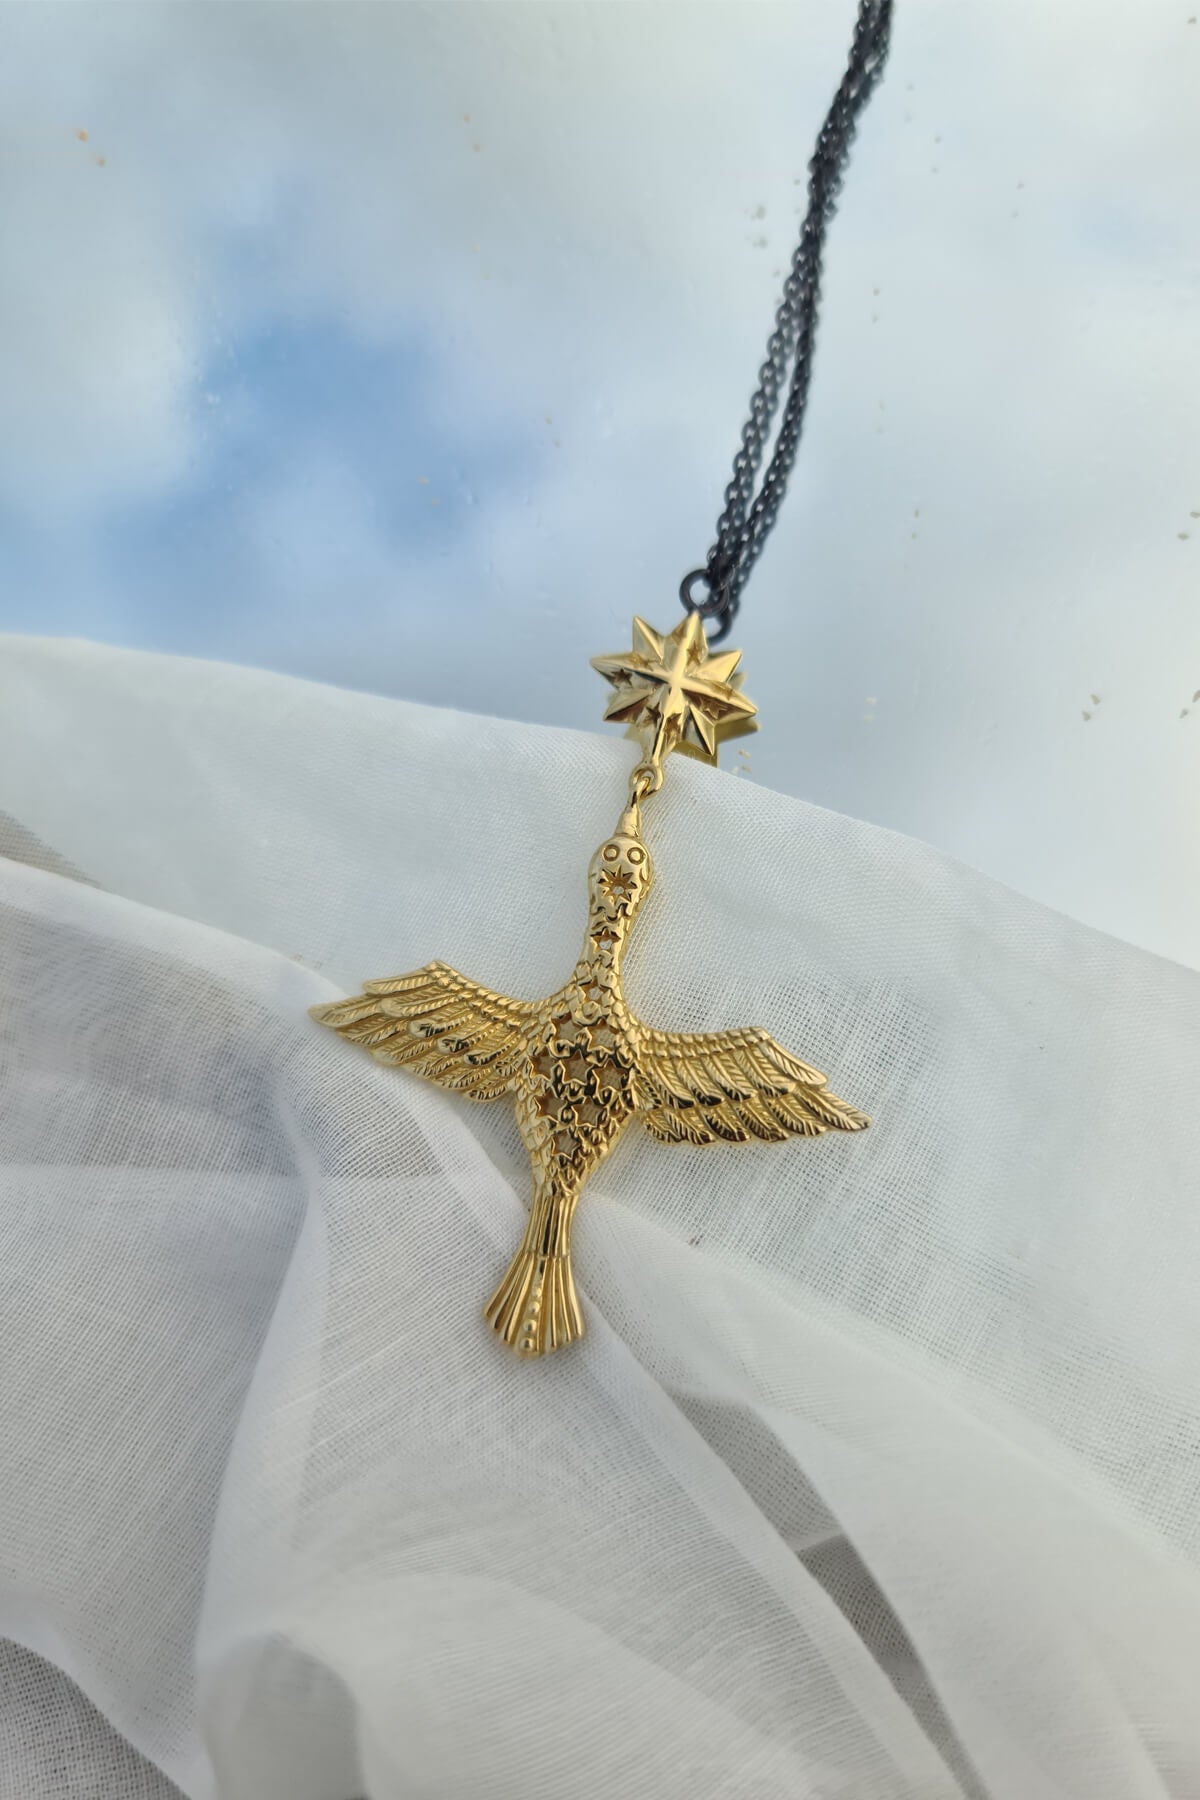 Fairy bird and 8-pointed star necklace. Silver, gold-plated, oxidized